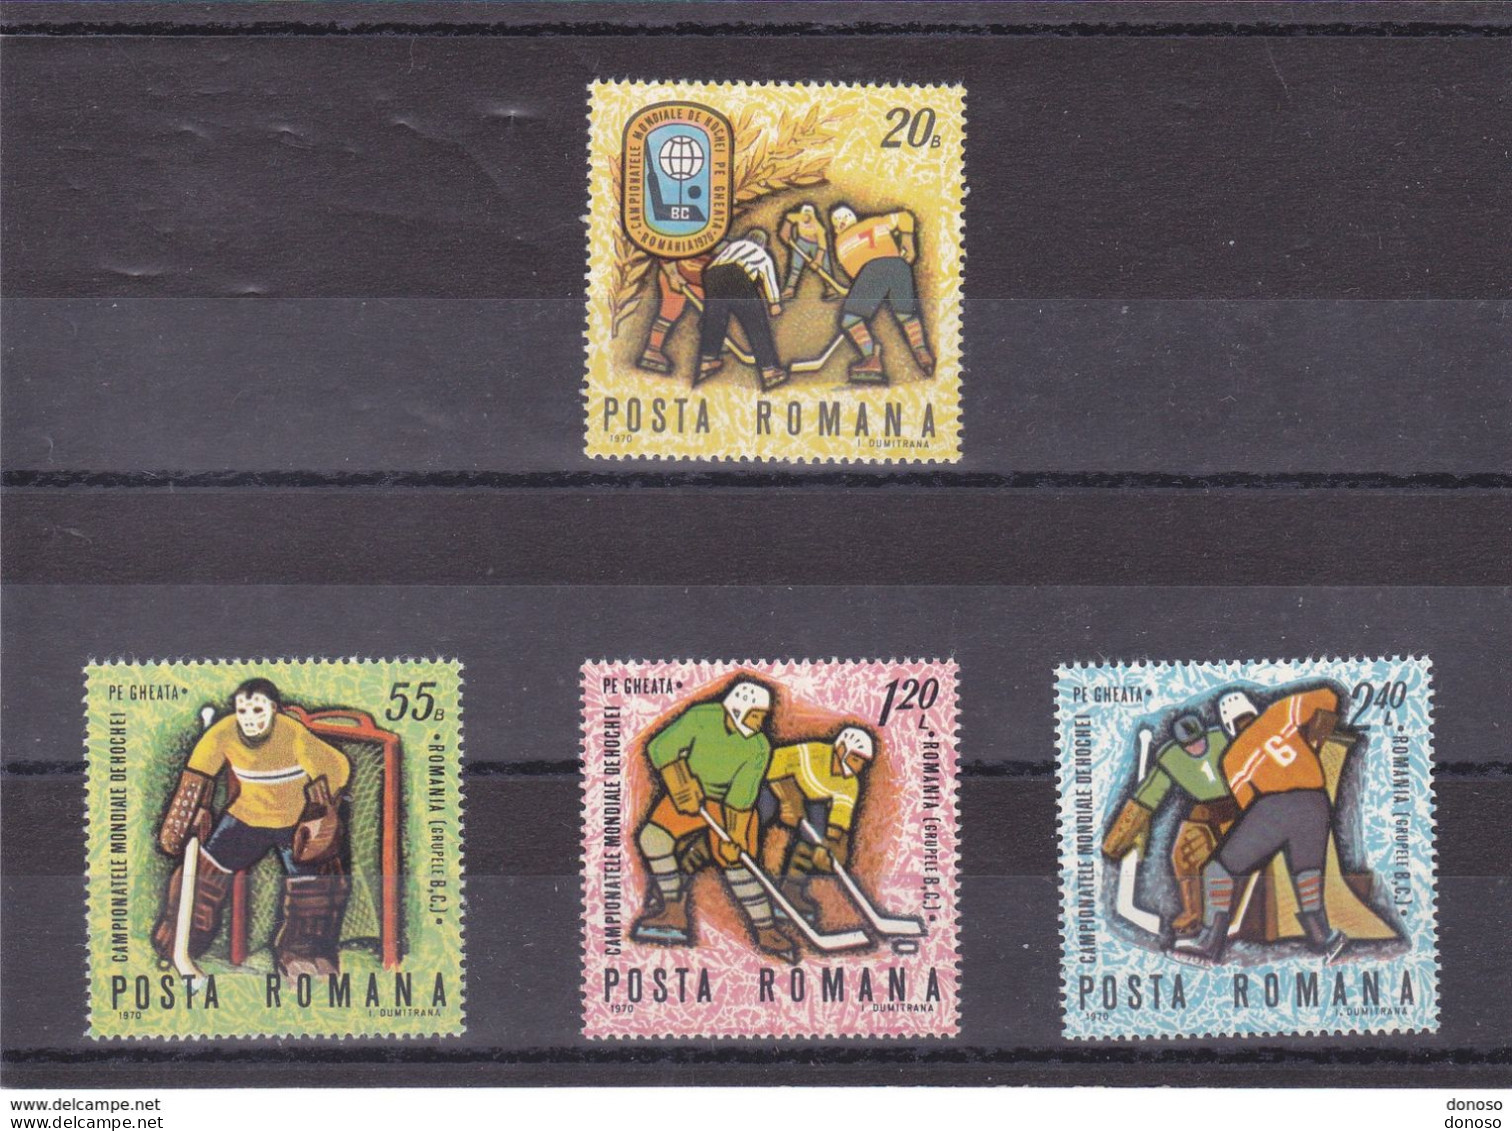 ROUMANIE 1970 HOCKEY SUR GLACE Yvert 2513-2516, Michel 2820-2823 NEUF** MNH Cote Yv 3 Euros - Unused Stamps